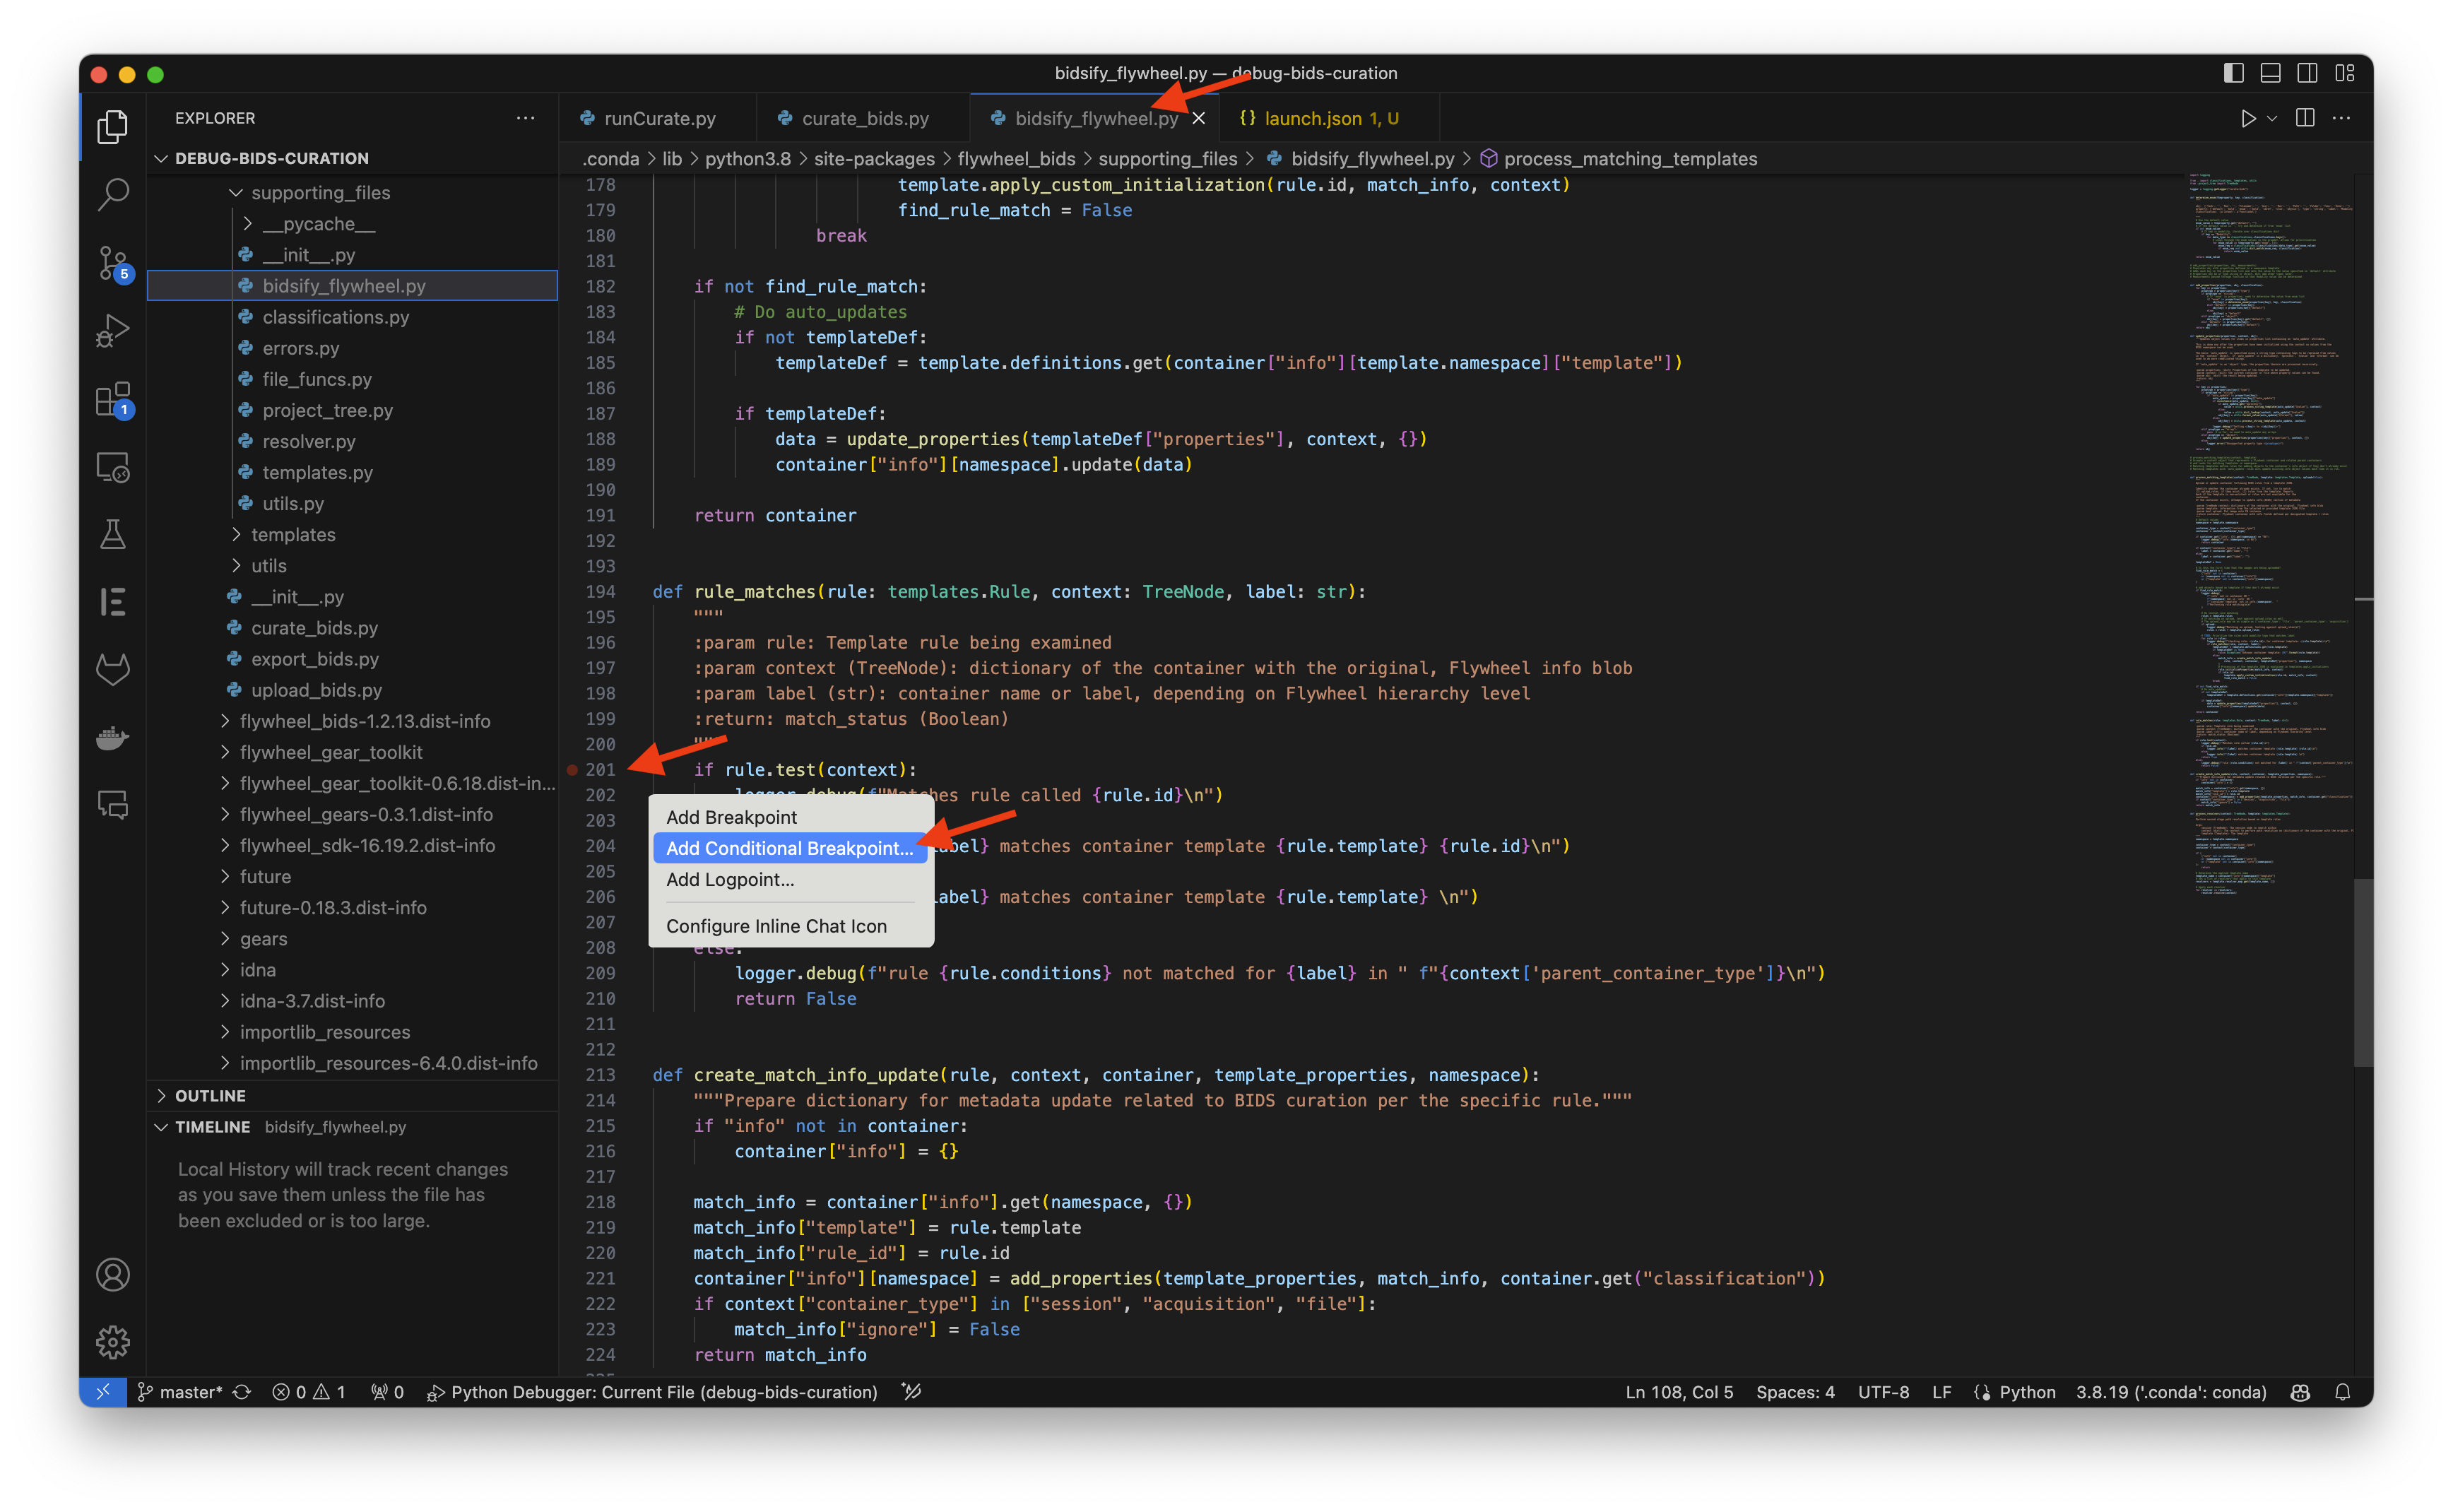 019-VSCode-ConditionalBreakpoint.png